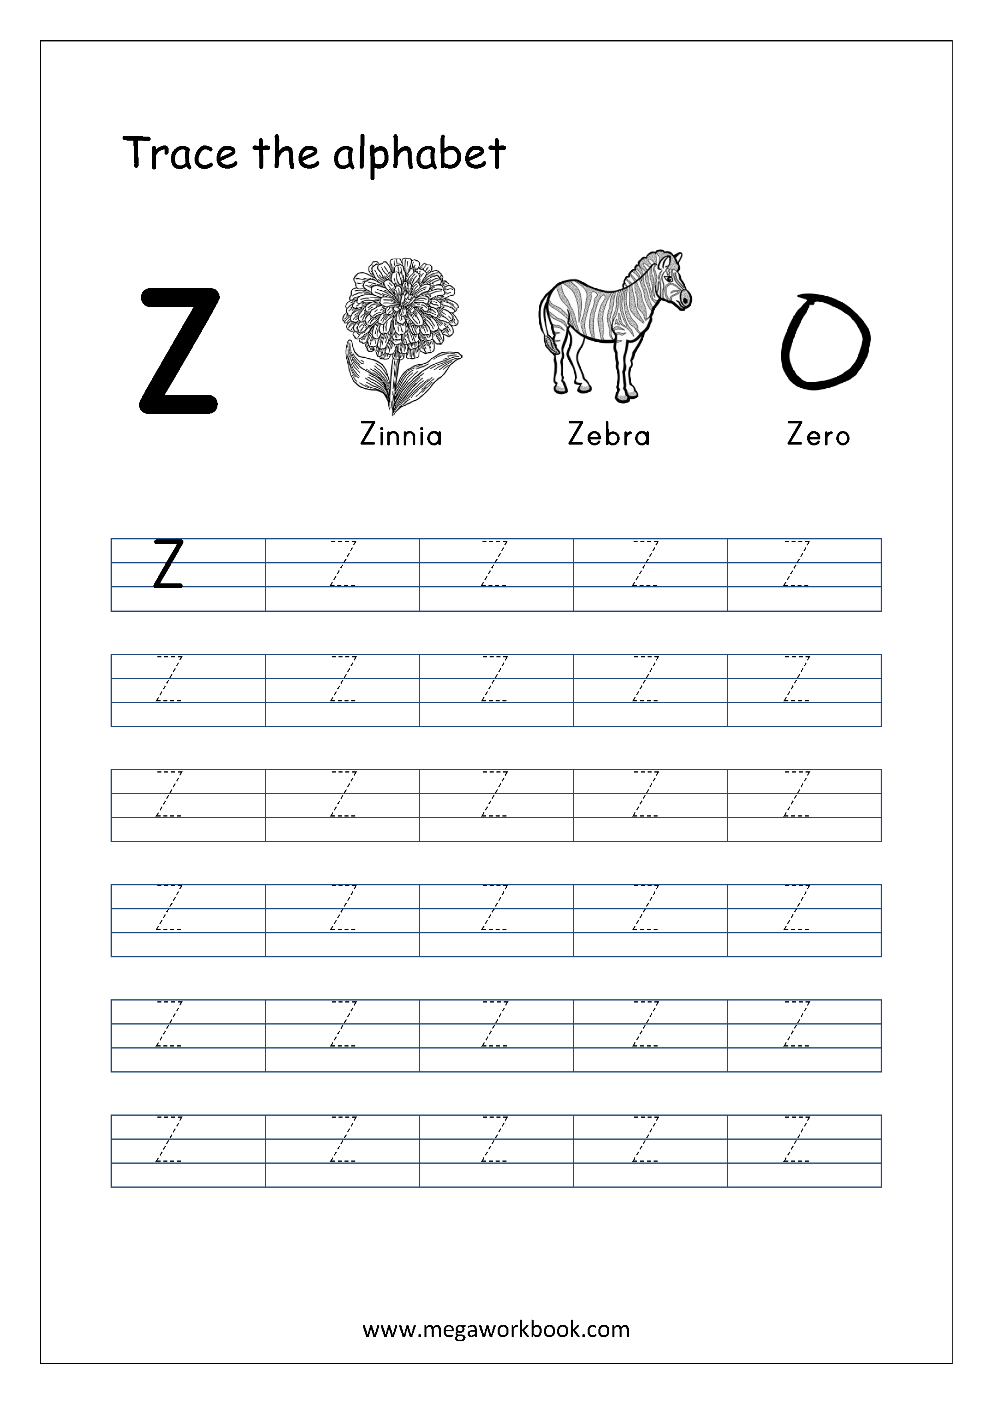 Tracing Letters - Alphabet Tracing - Capital Letters - Letter Tracing ...